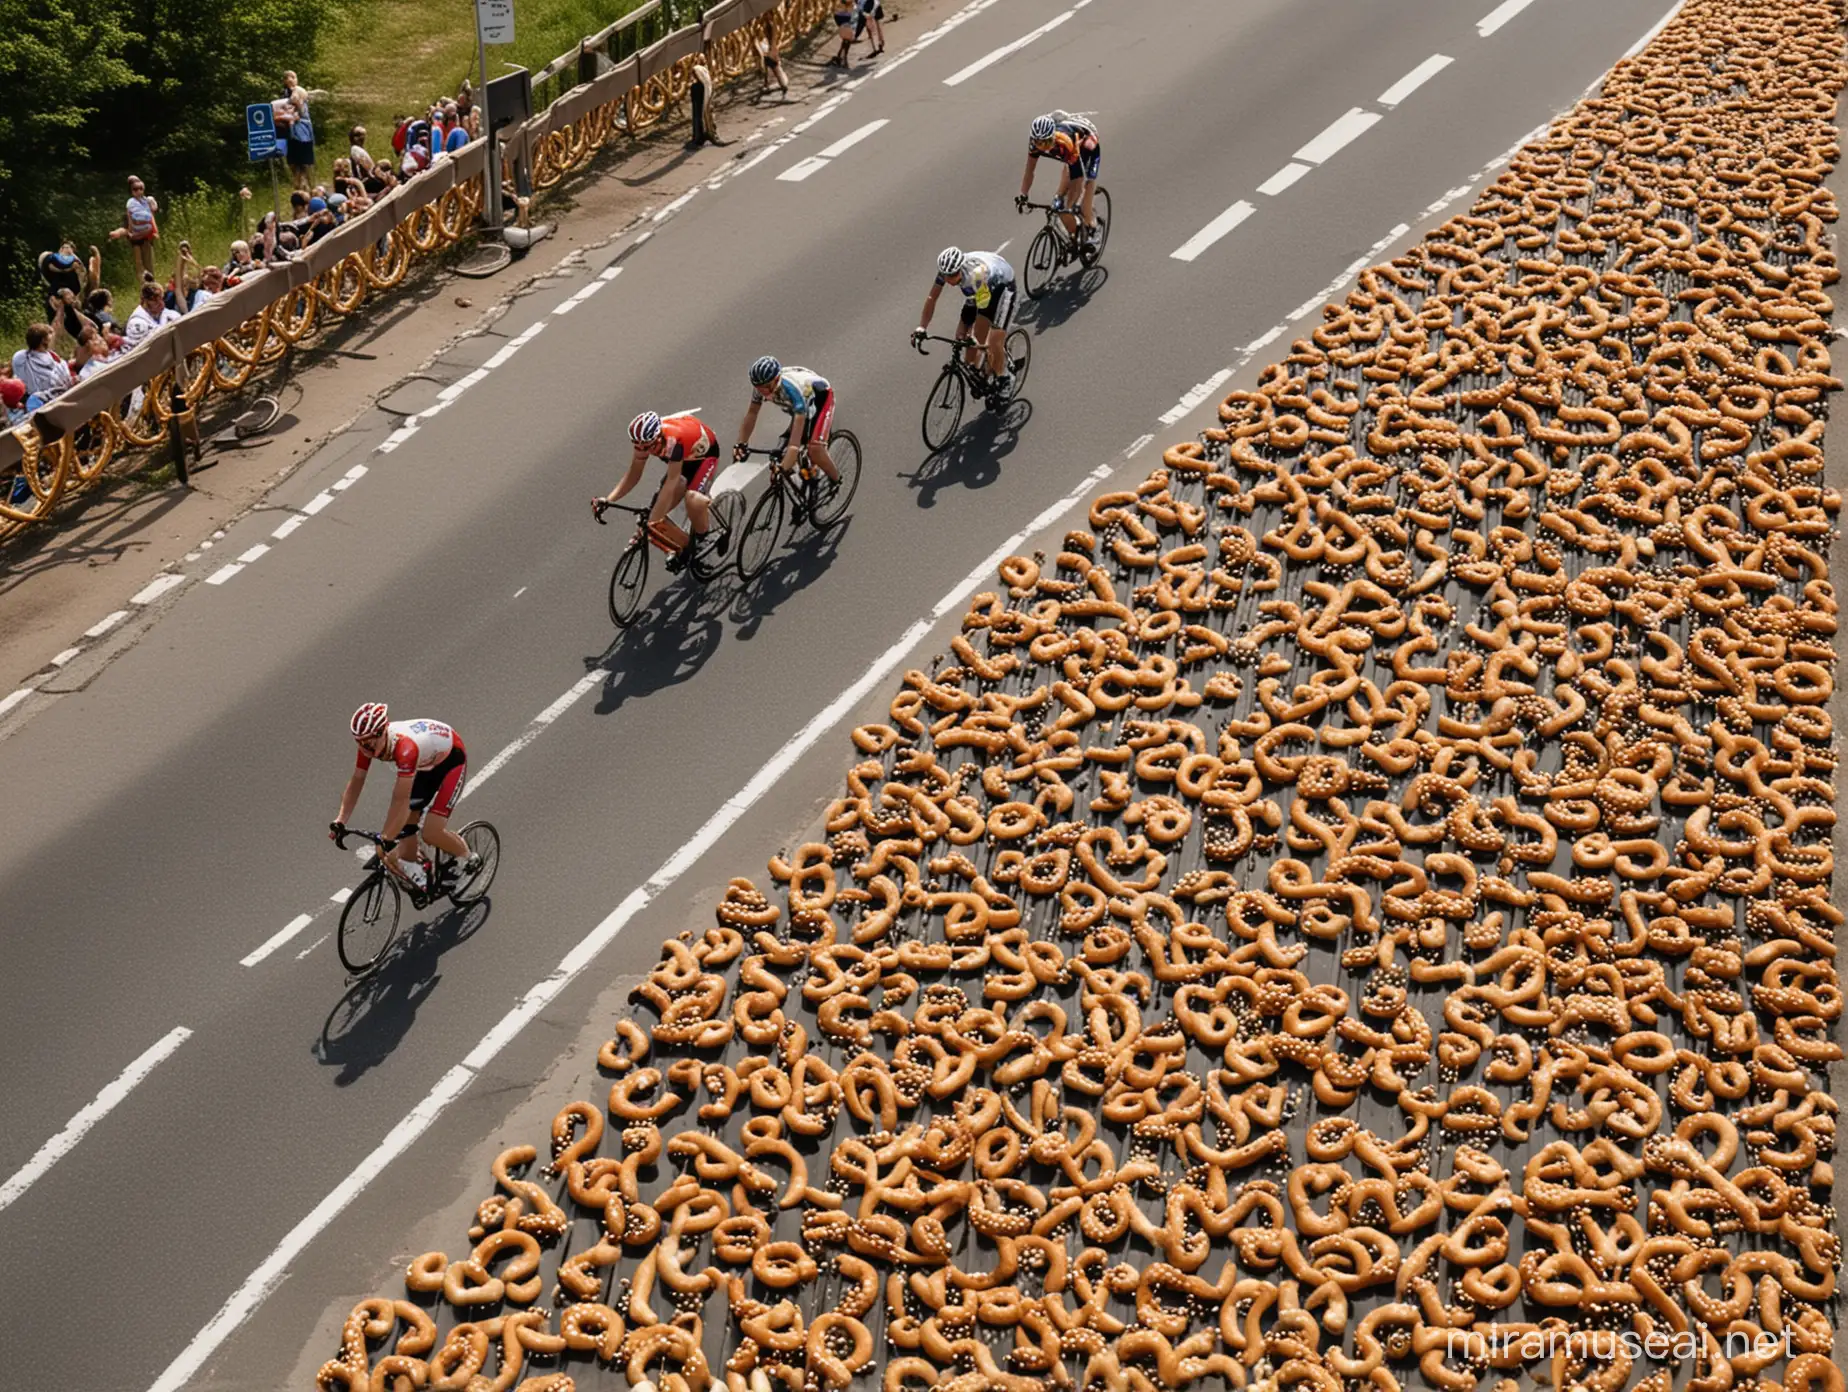 A world-class cycle road race. Riders pass through a lot of pretzels flying around.